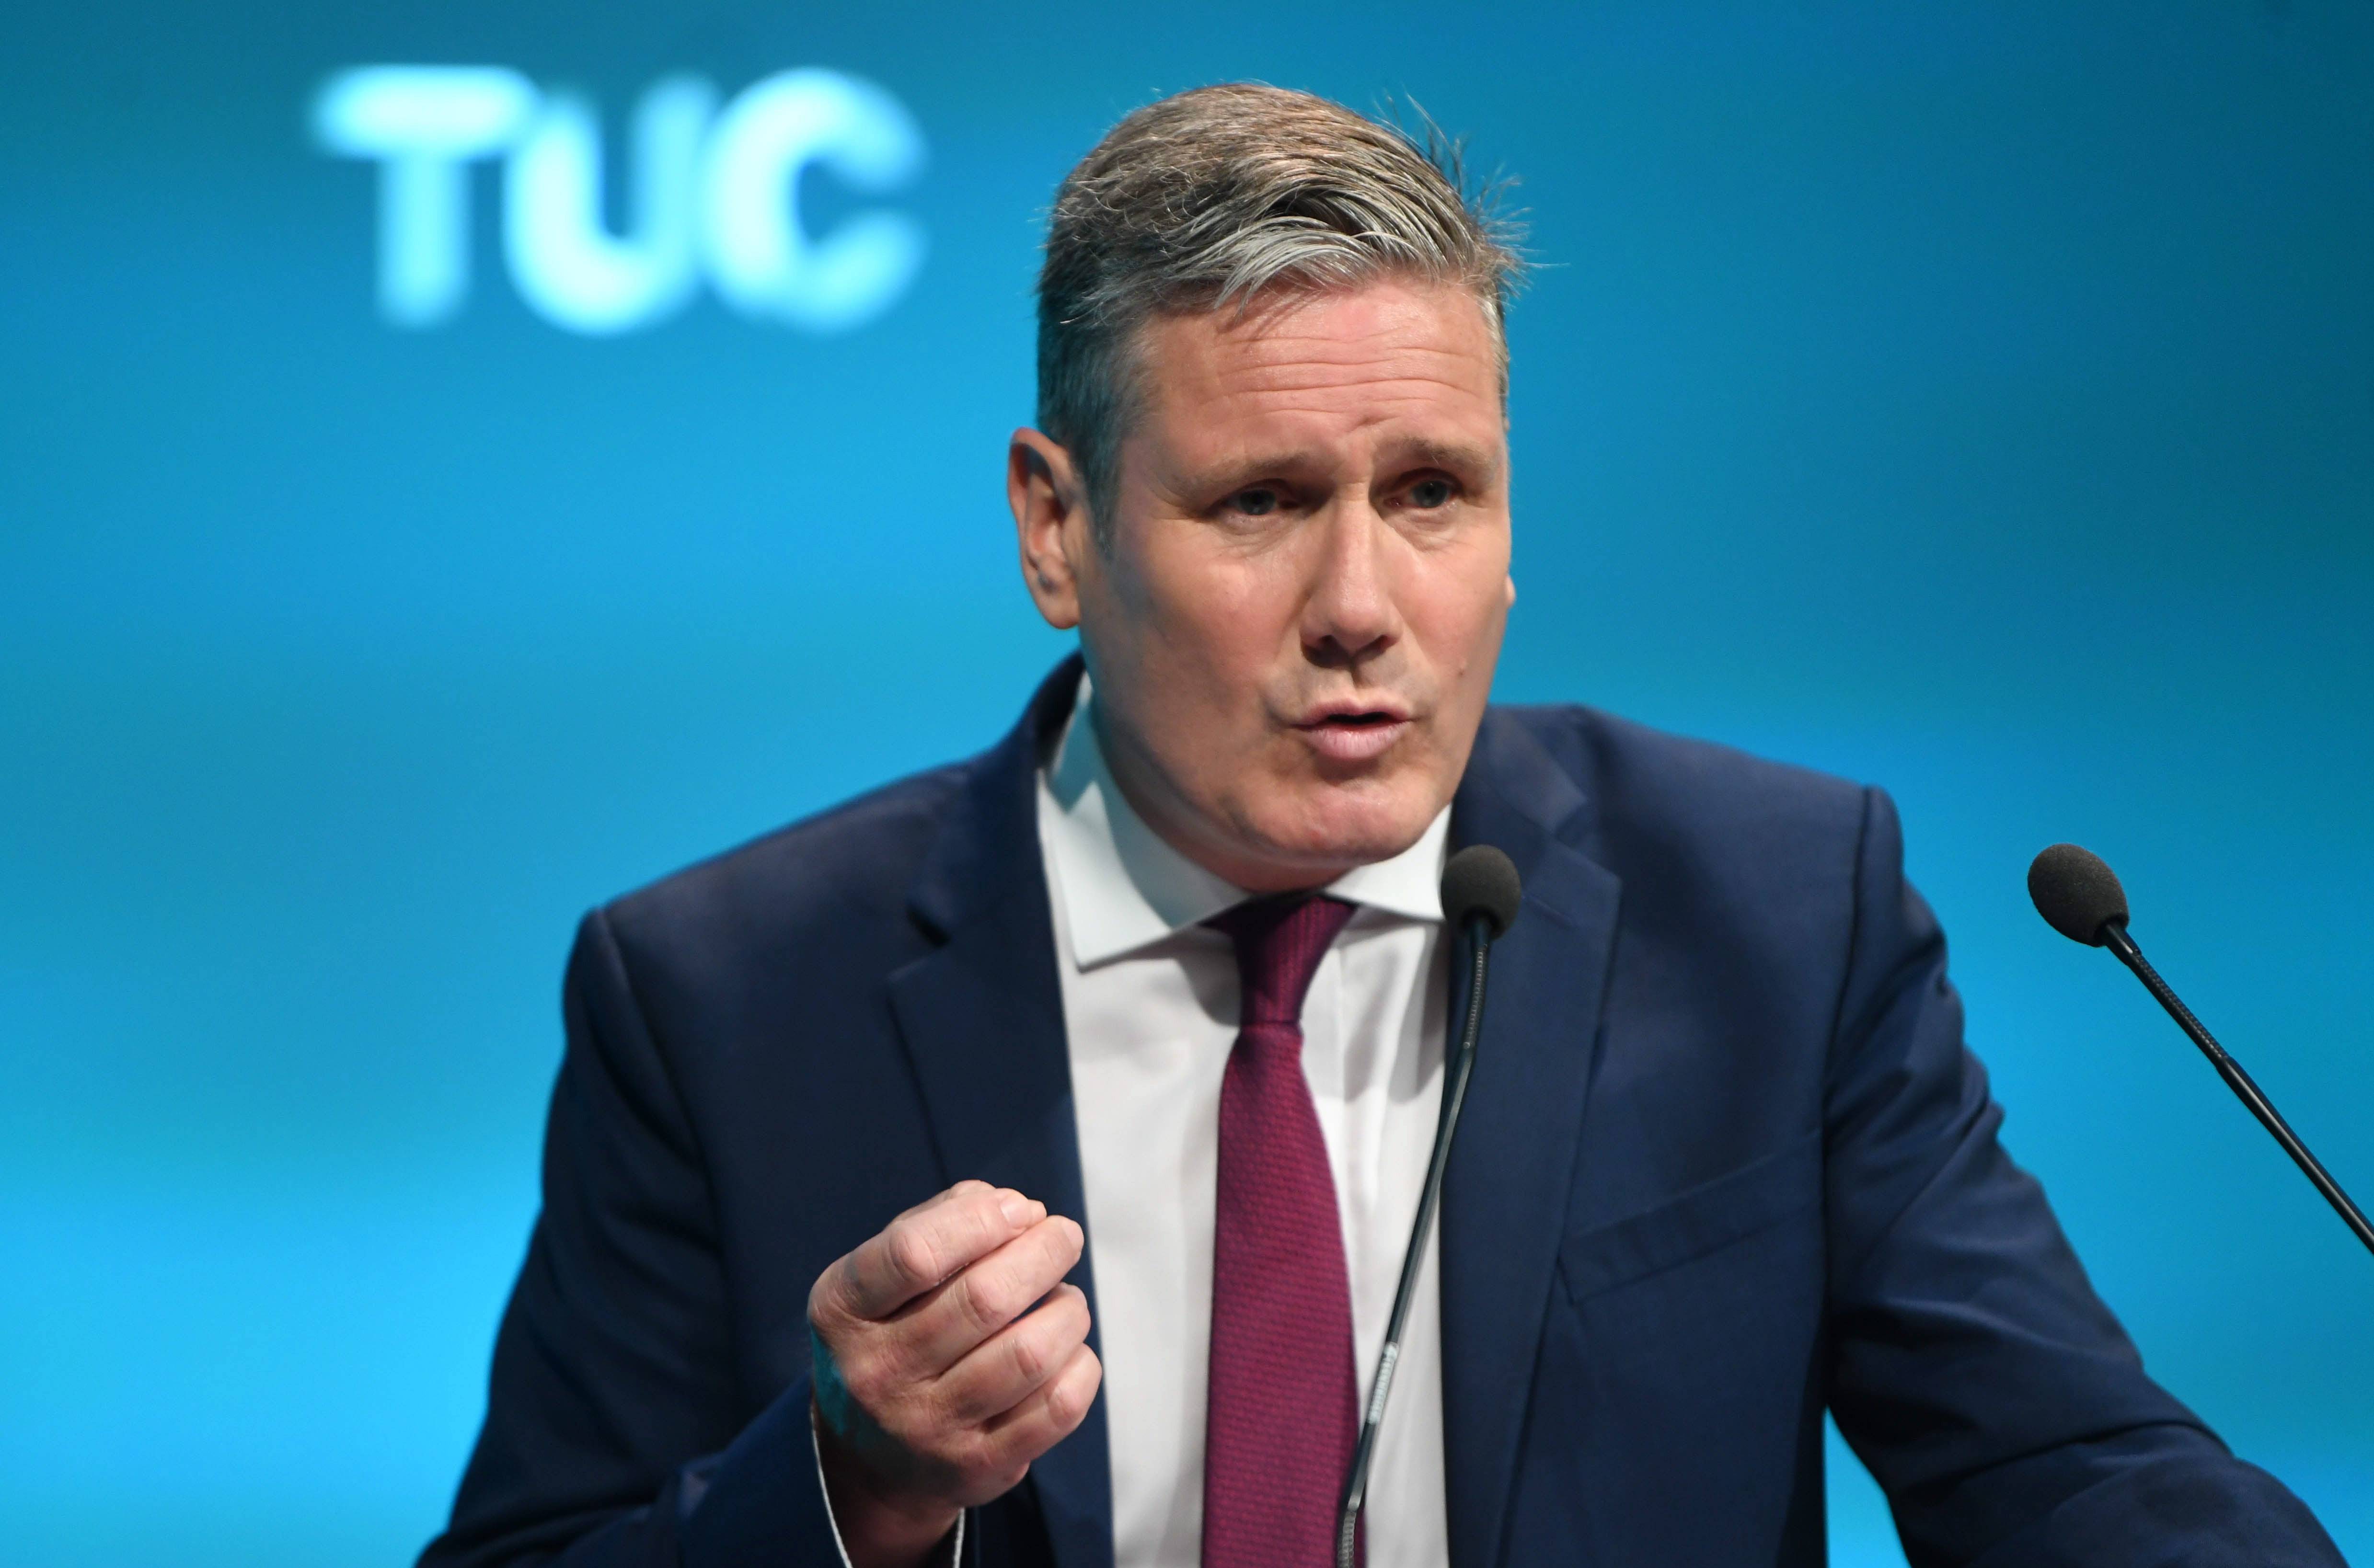 The Labour leadership is negotiating with the Labour Trade Union Organisation in an effort to decide what the party’s next manifesto should say